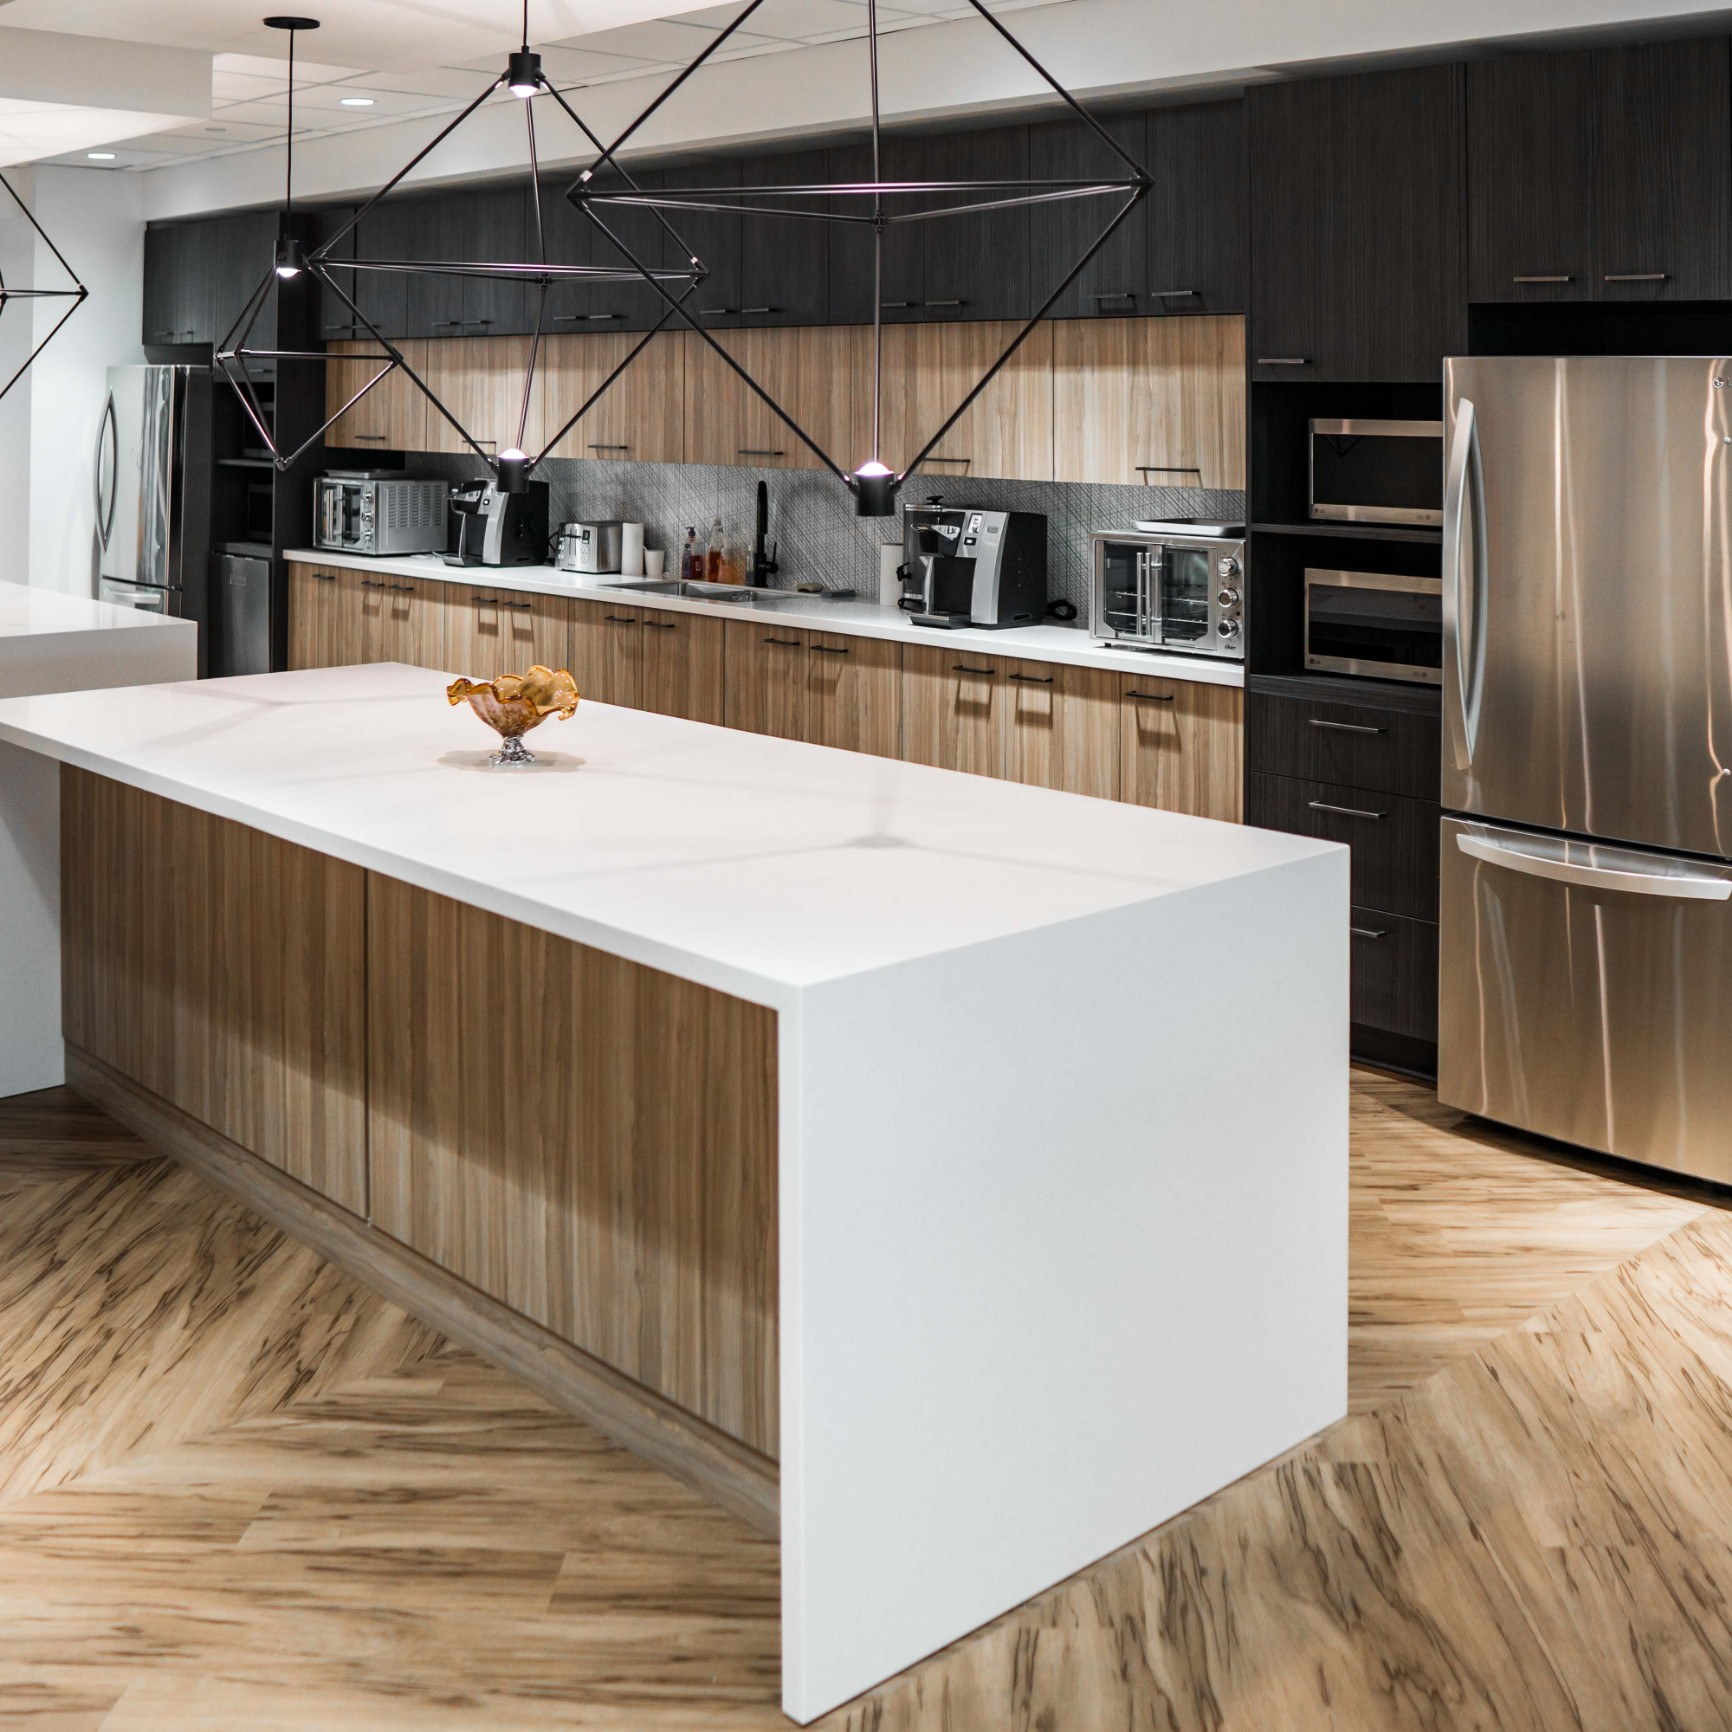 A kitchen with a large white marble island, modern black light fixtures, stainless steel appliances and light hardwood floors and wooden cabinets.